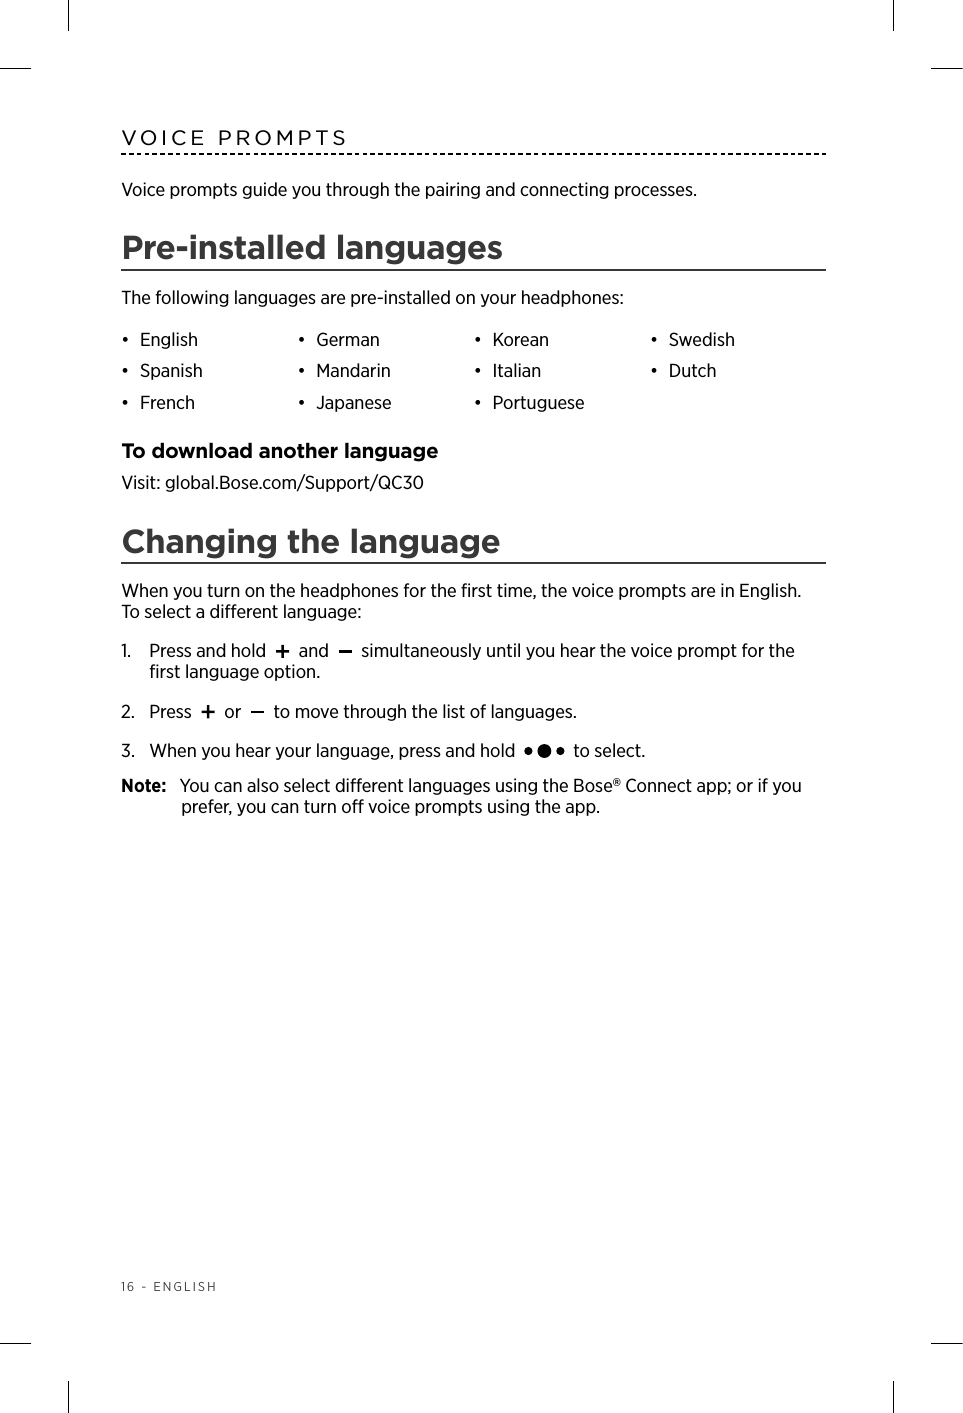 16 - ENGLISHVOICE PROMPTSVoice prompts guide you through the pairing and connecting processes. Pre-installed languagesThe following languages are pre-installed on your headphones:•  English •  German •  Korean •  Swedish•  Spanish •  Mandarin •  Italian •  Dutch•  French •  Japanese •  PortugueseTo download another languageVisit: global.Bose.com/Support/QC30Changing the languageWhen you turn on the headphones for the ﬁrst time, the voice prompts are in English.  To select a dierent language:1.   Press and hold   and   simultaneously until you hear the voice prompt for the ﬁrst language option. 2.  Press   or   to move through the list of languages.3.   When you hear your language, press and hold   to select.Note:  You can also select dierent languages using the Bose Connect app; or if you prefer, you can turn o voice prompts using the app.